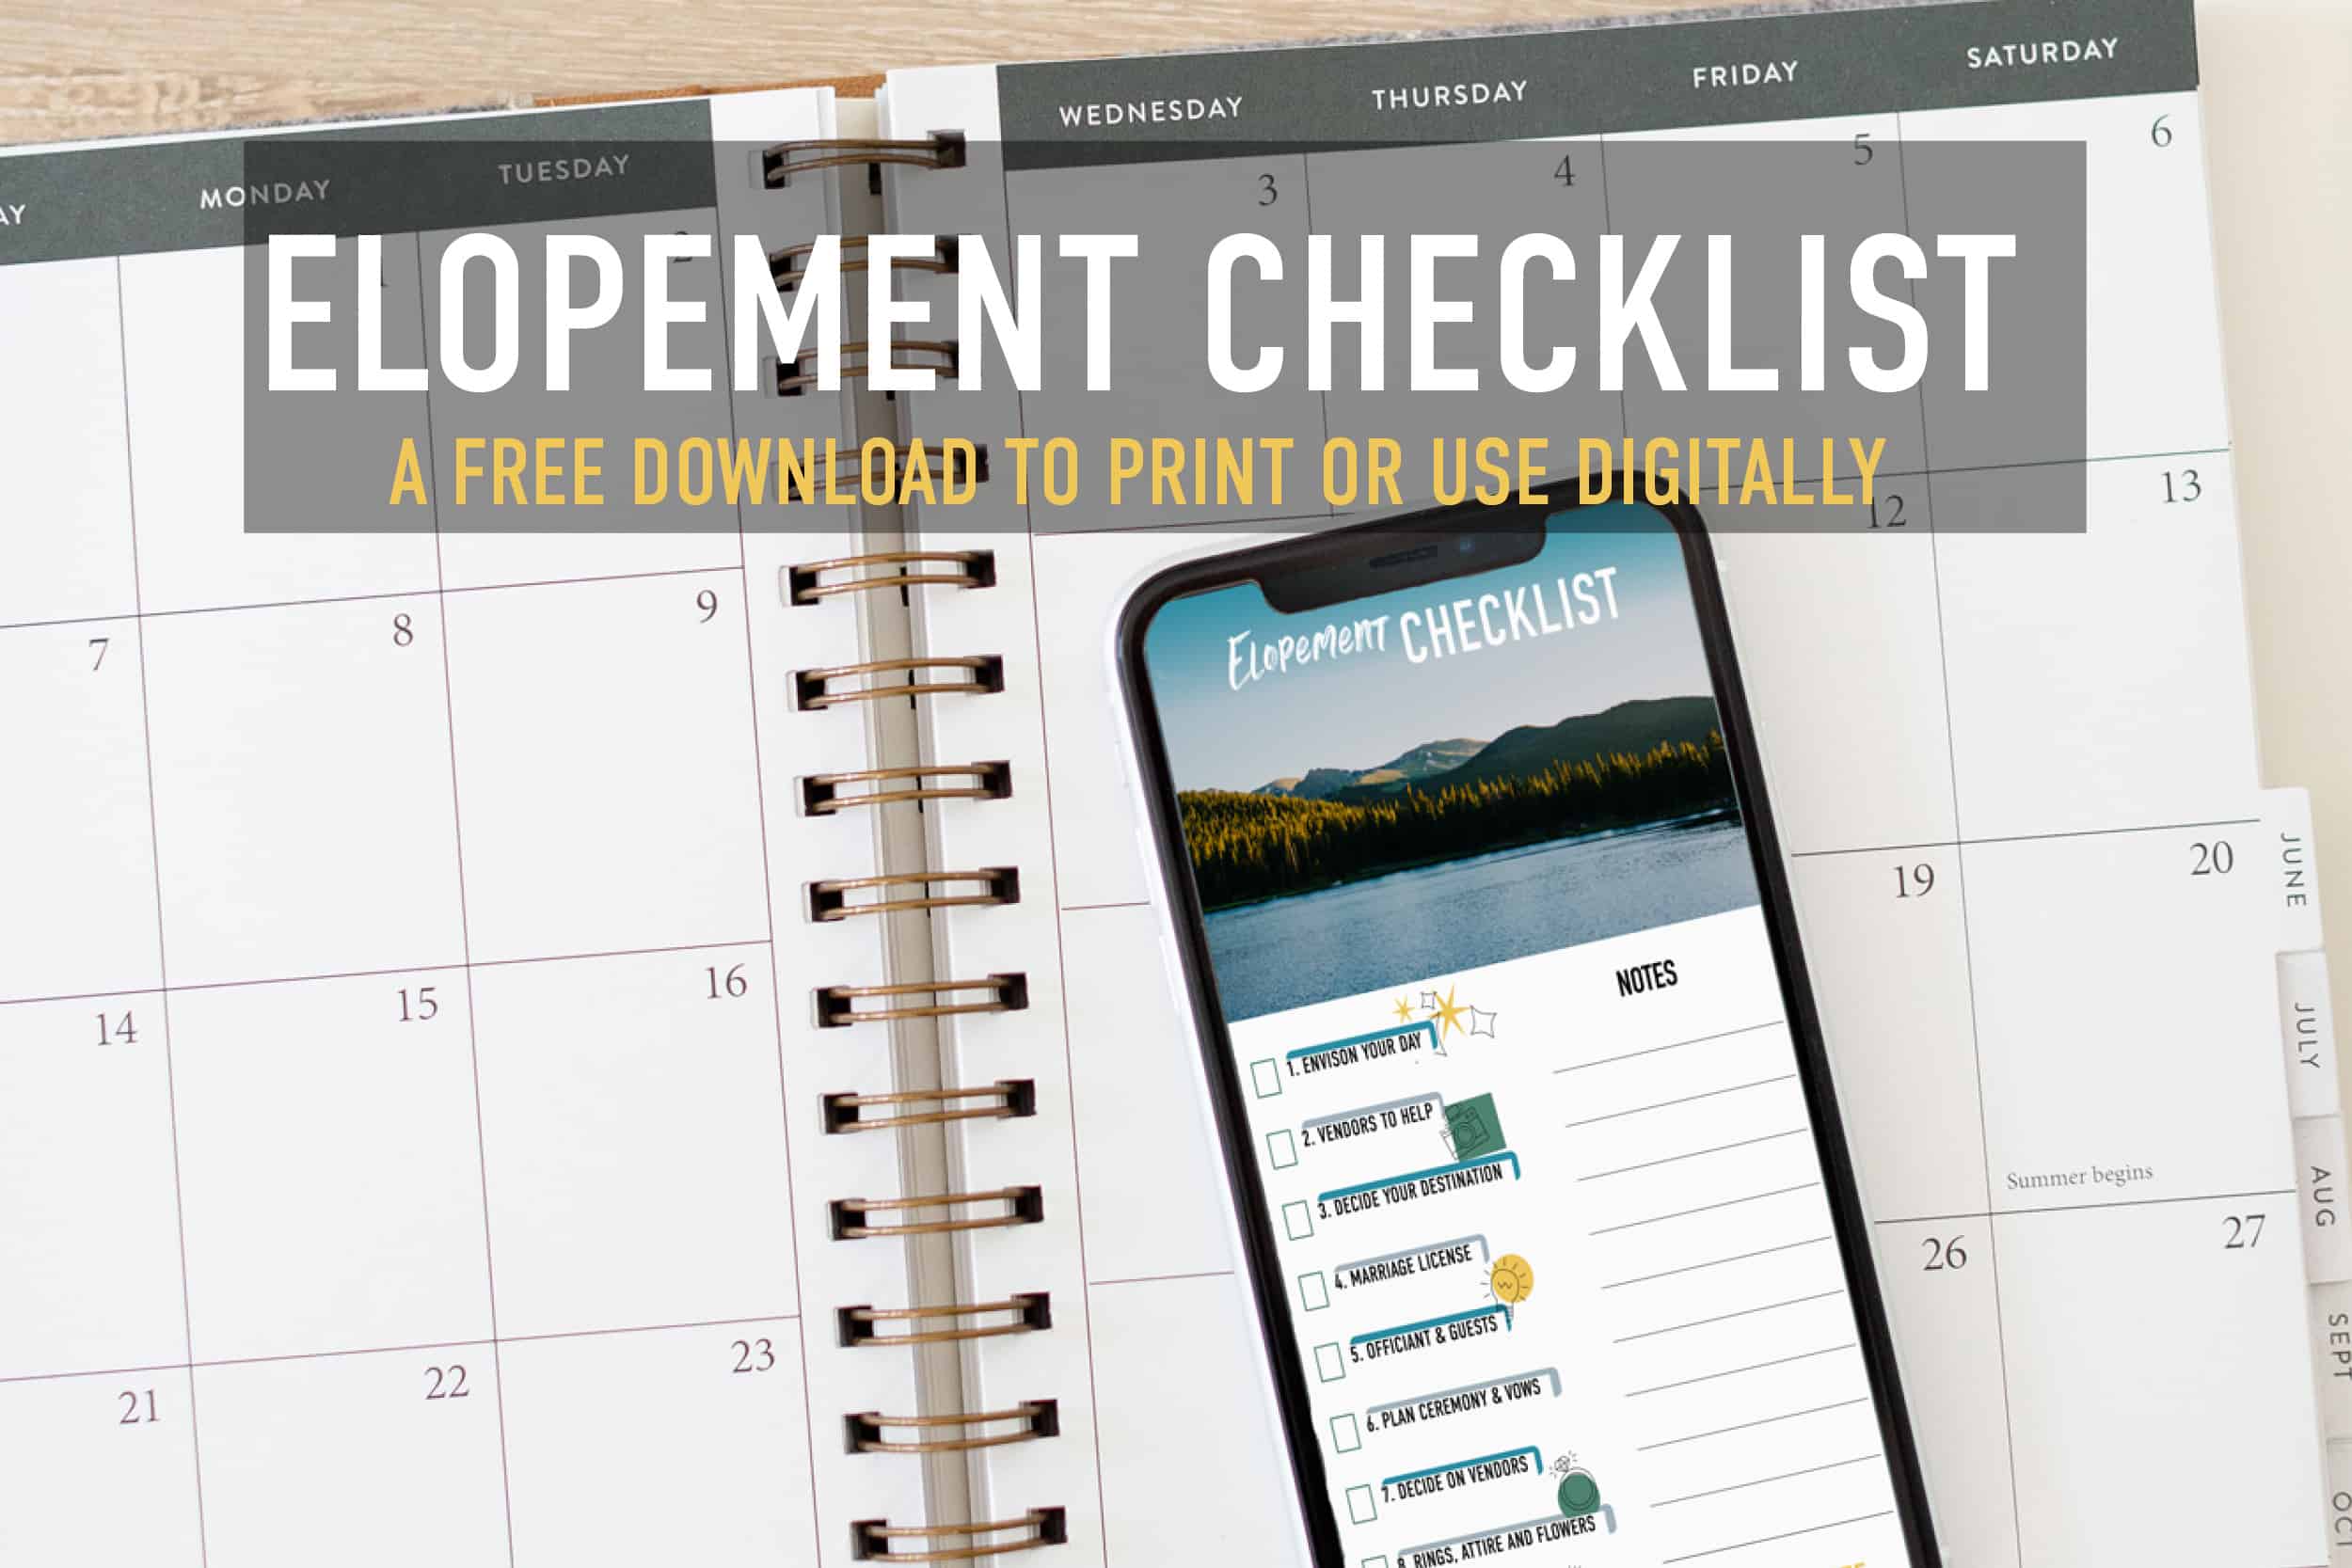 elopement checklist pdf on a phone over a calendar with the words "elopement checklist a free download to print or use digitally"